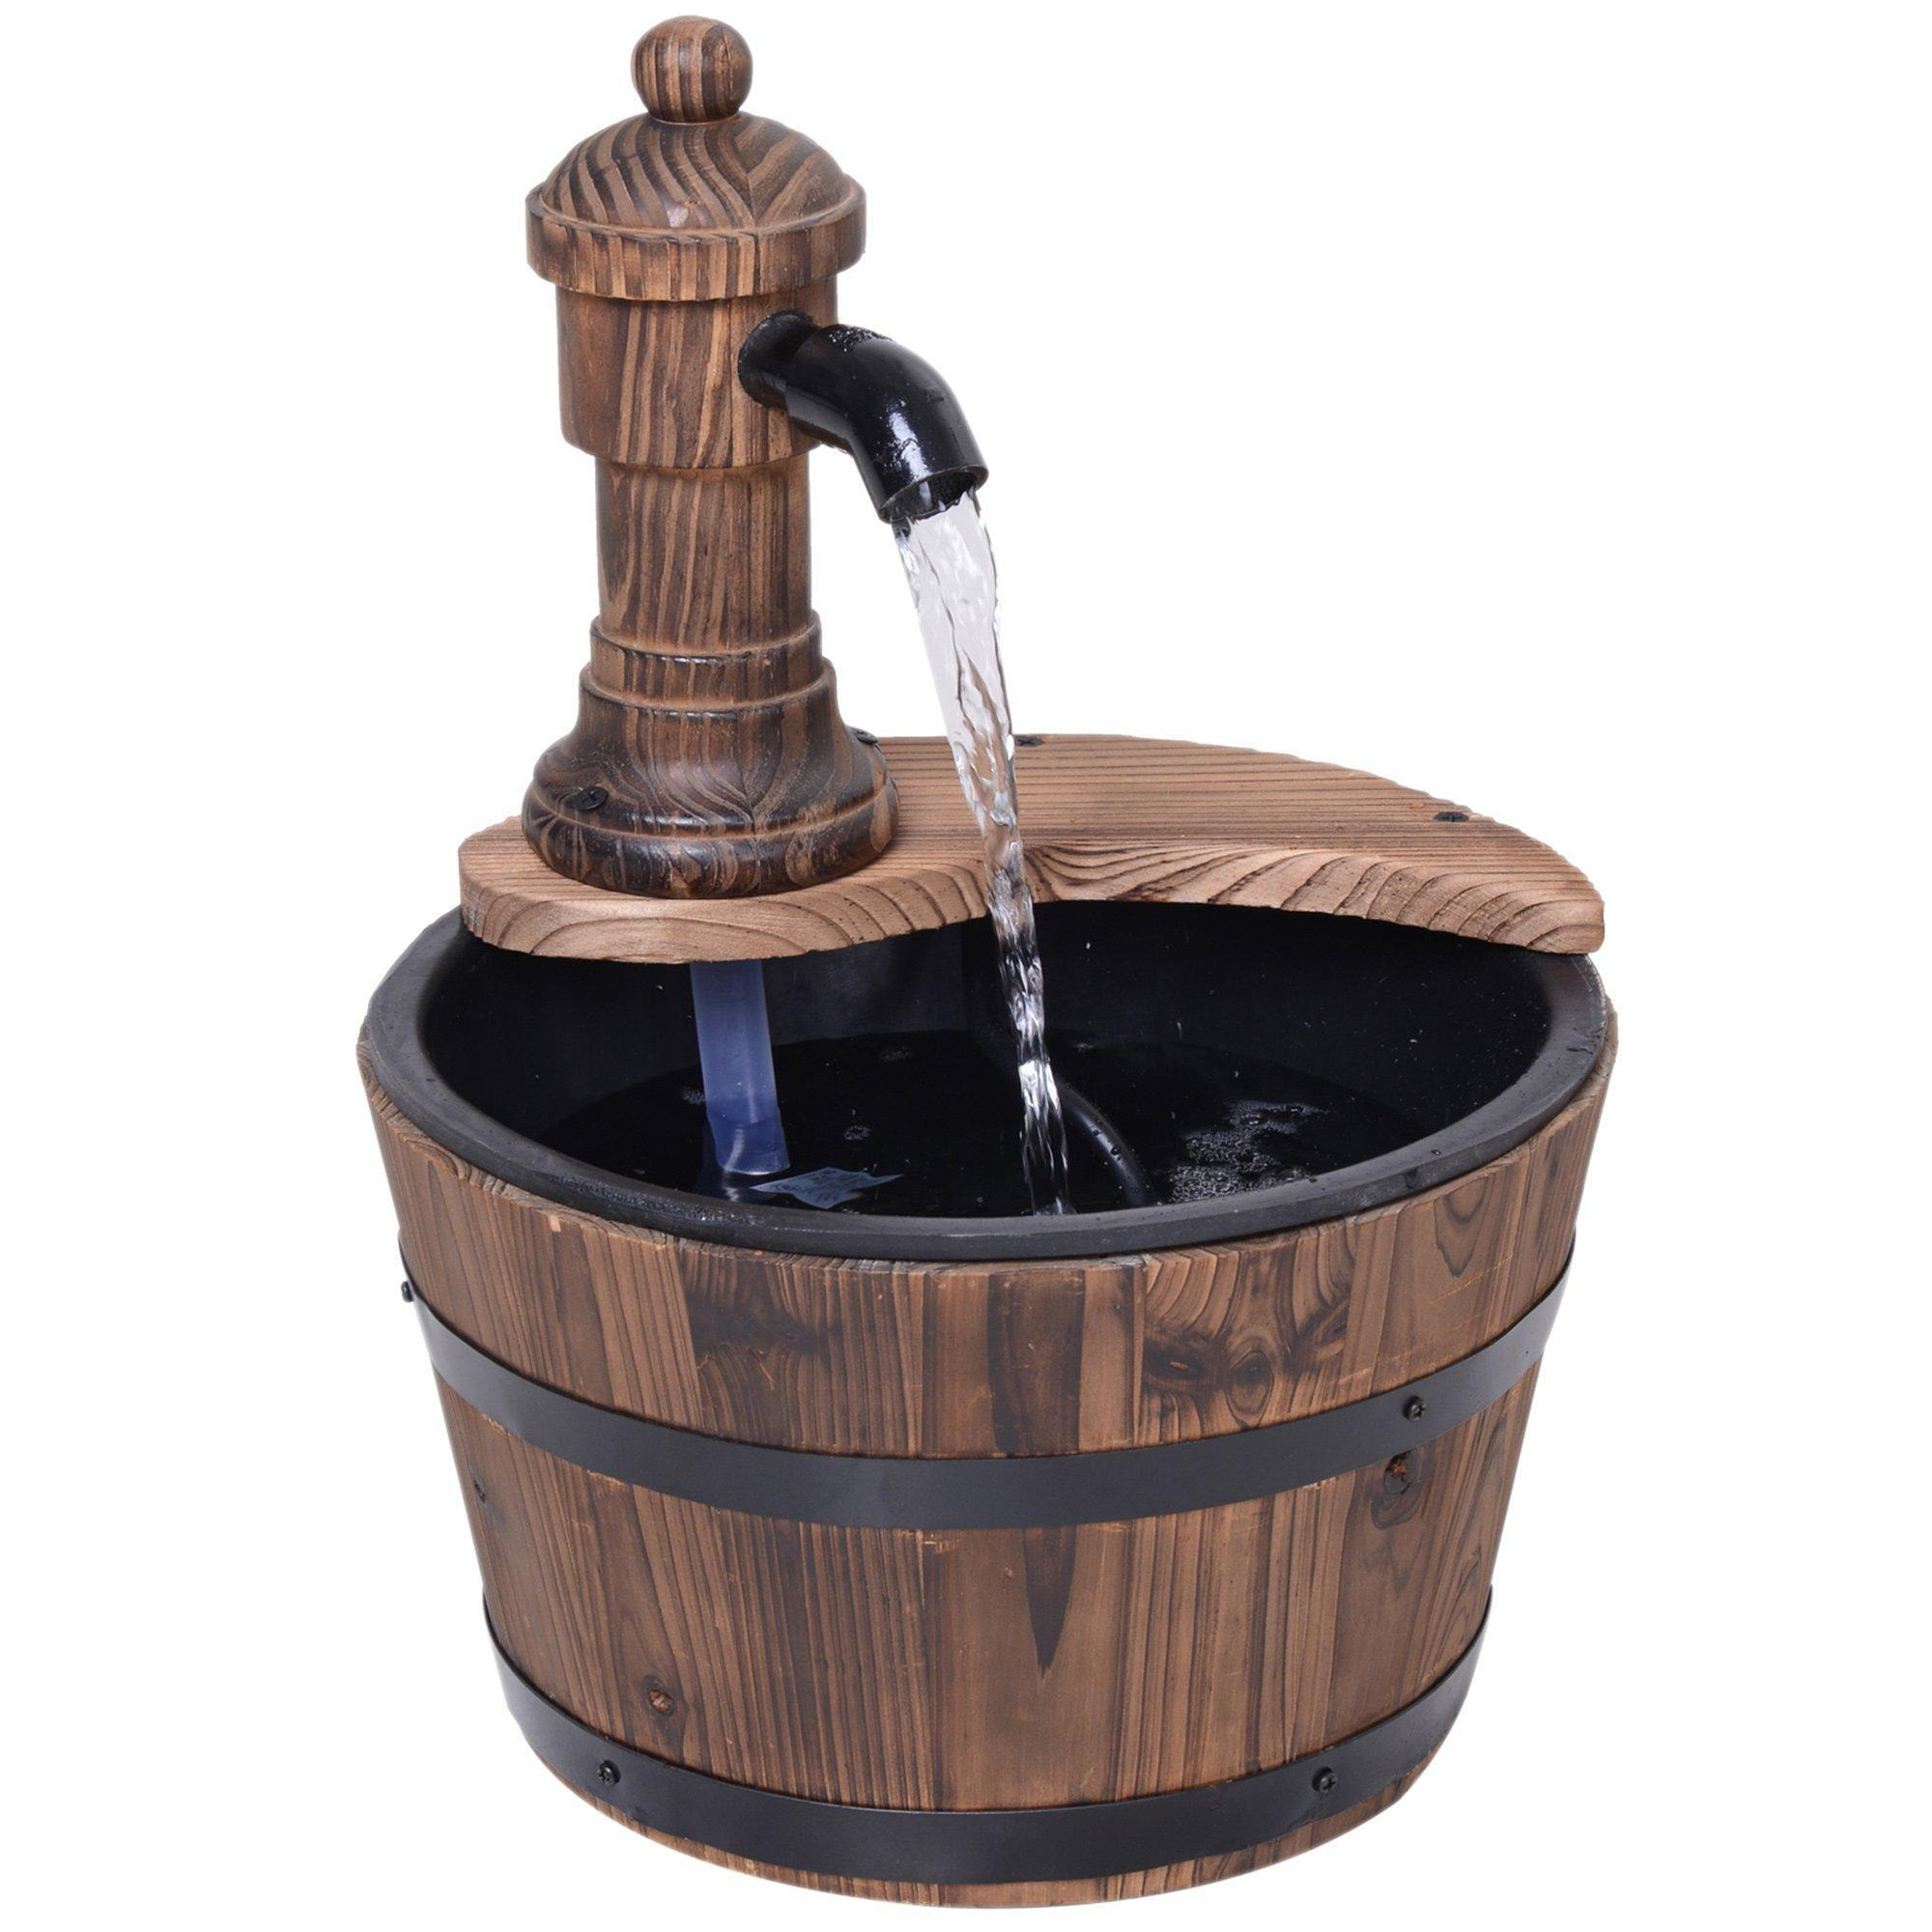 Barrel Water Fountain Rustic Wood Electric Water Feature with Pump Garden - image 1